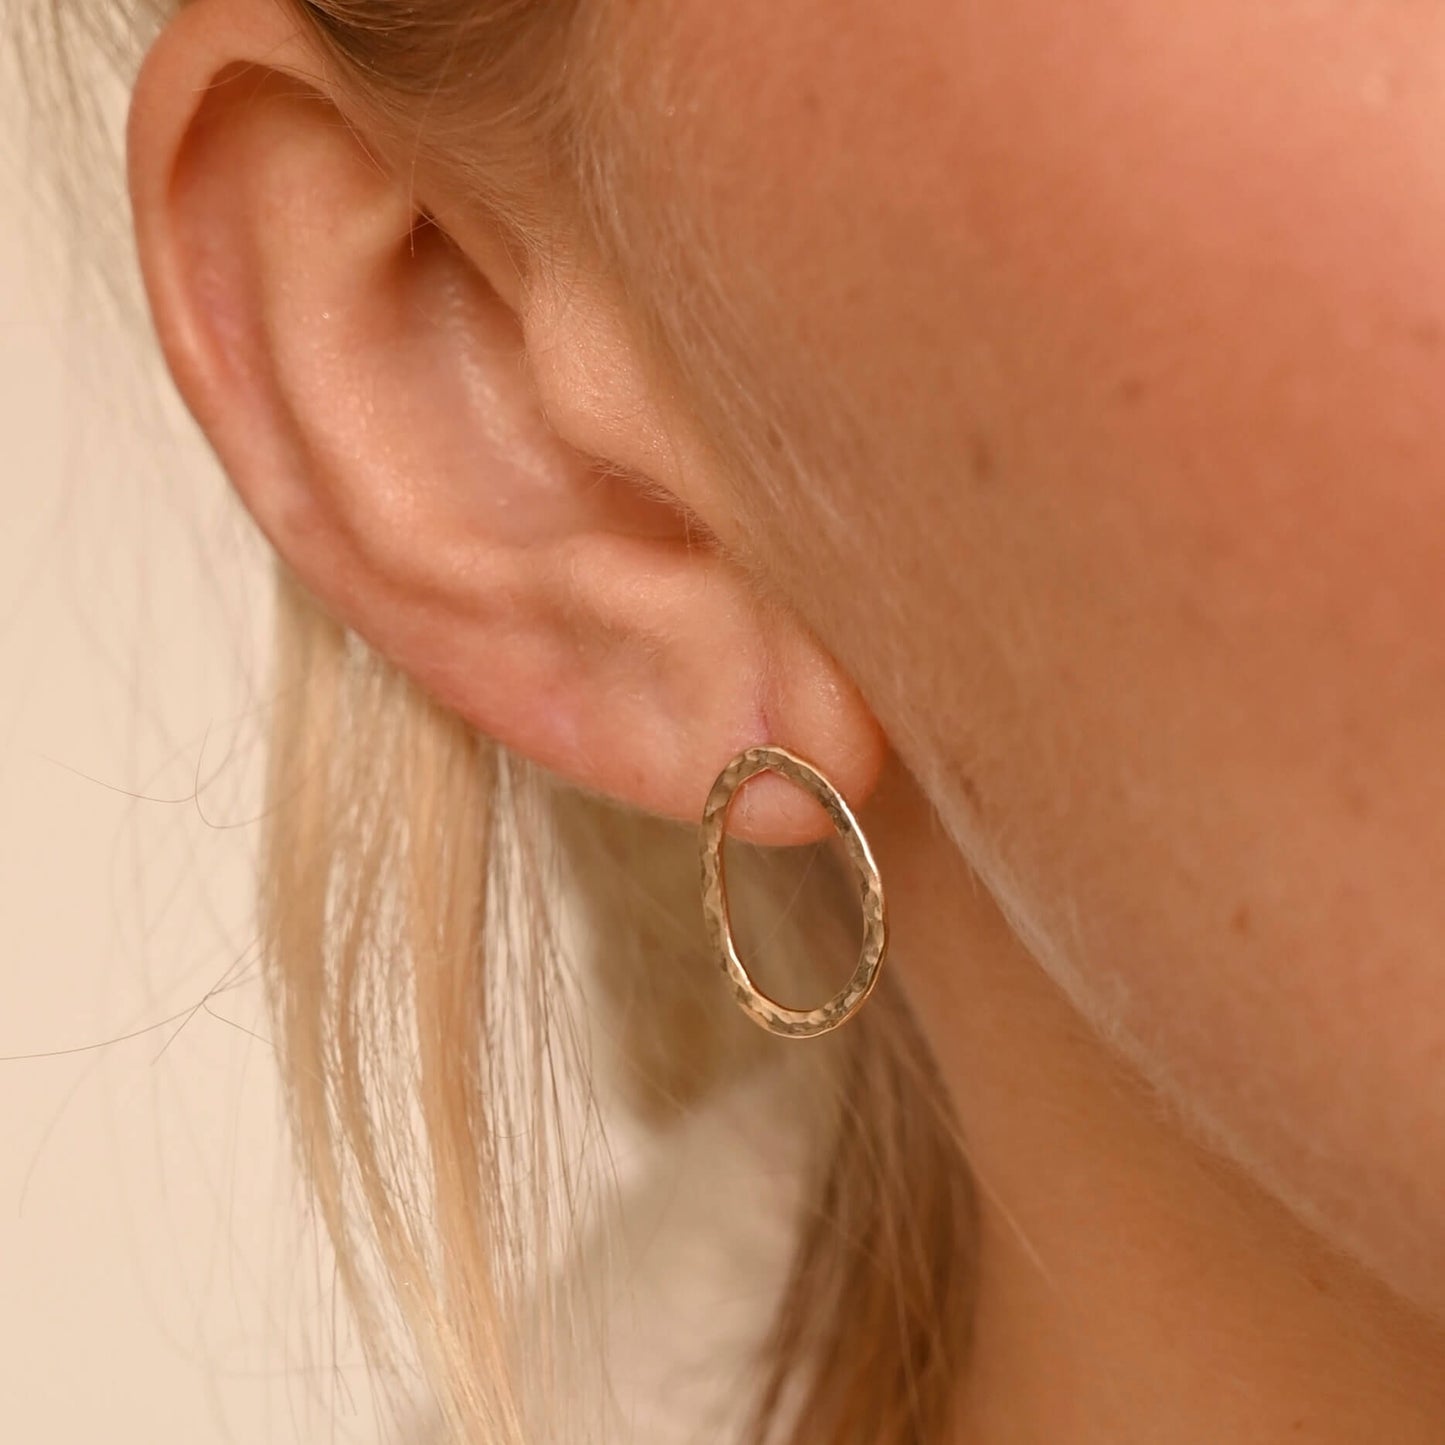 Gold Hammered Oval Earrings - Drumgreenagh Jewellery Gifts, Ireland